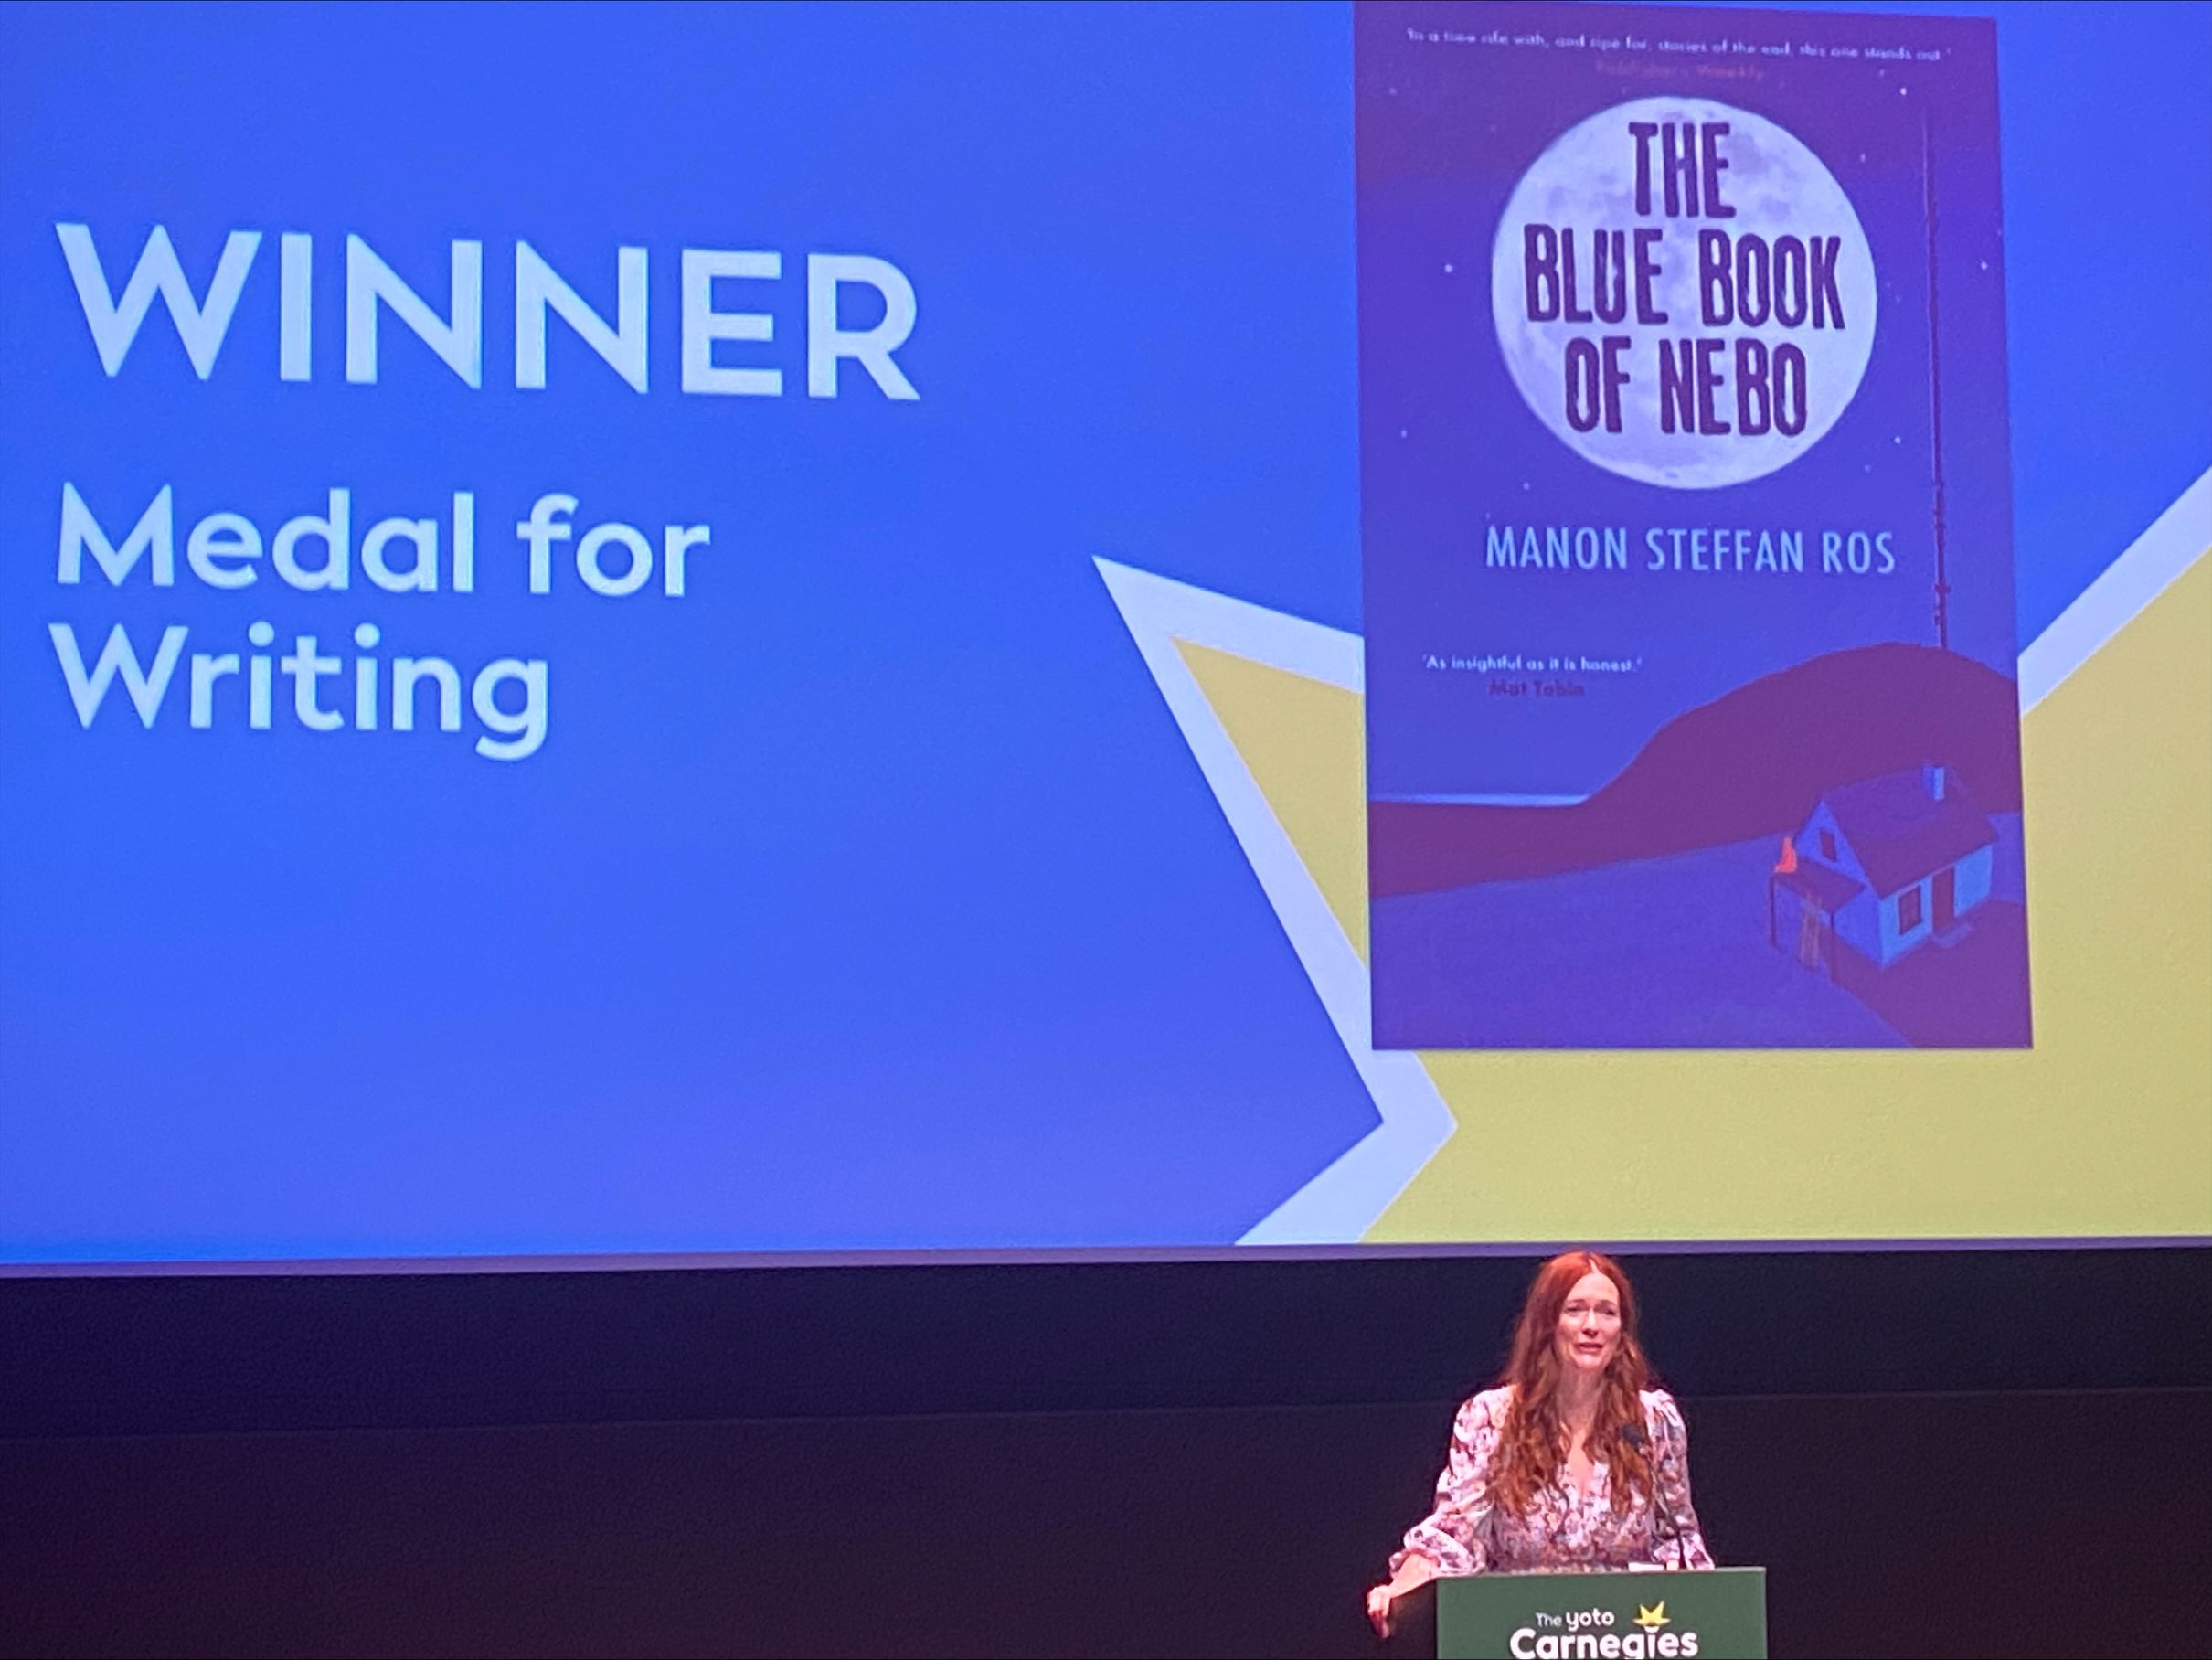 Congratulations to Manon Steffan Ros and her novel The Blue Book of Nebo – winner of the Yoto Carnegie Medal